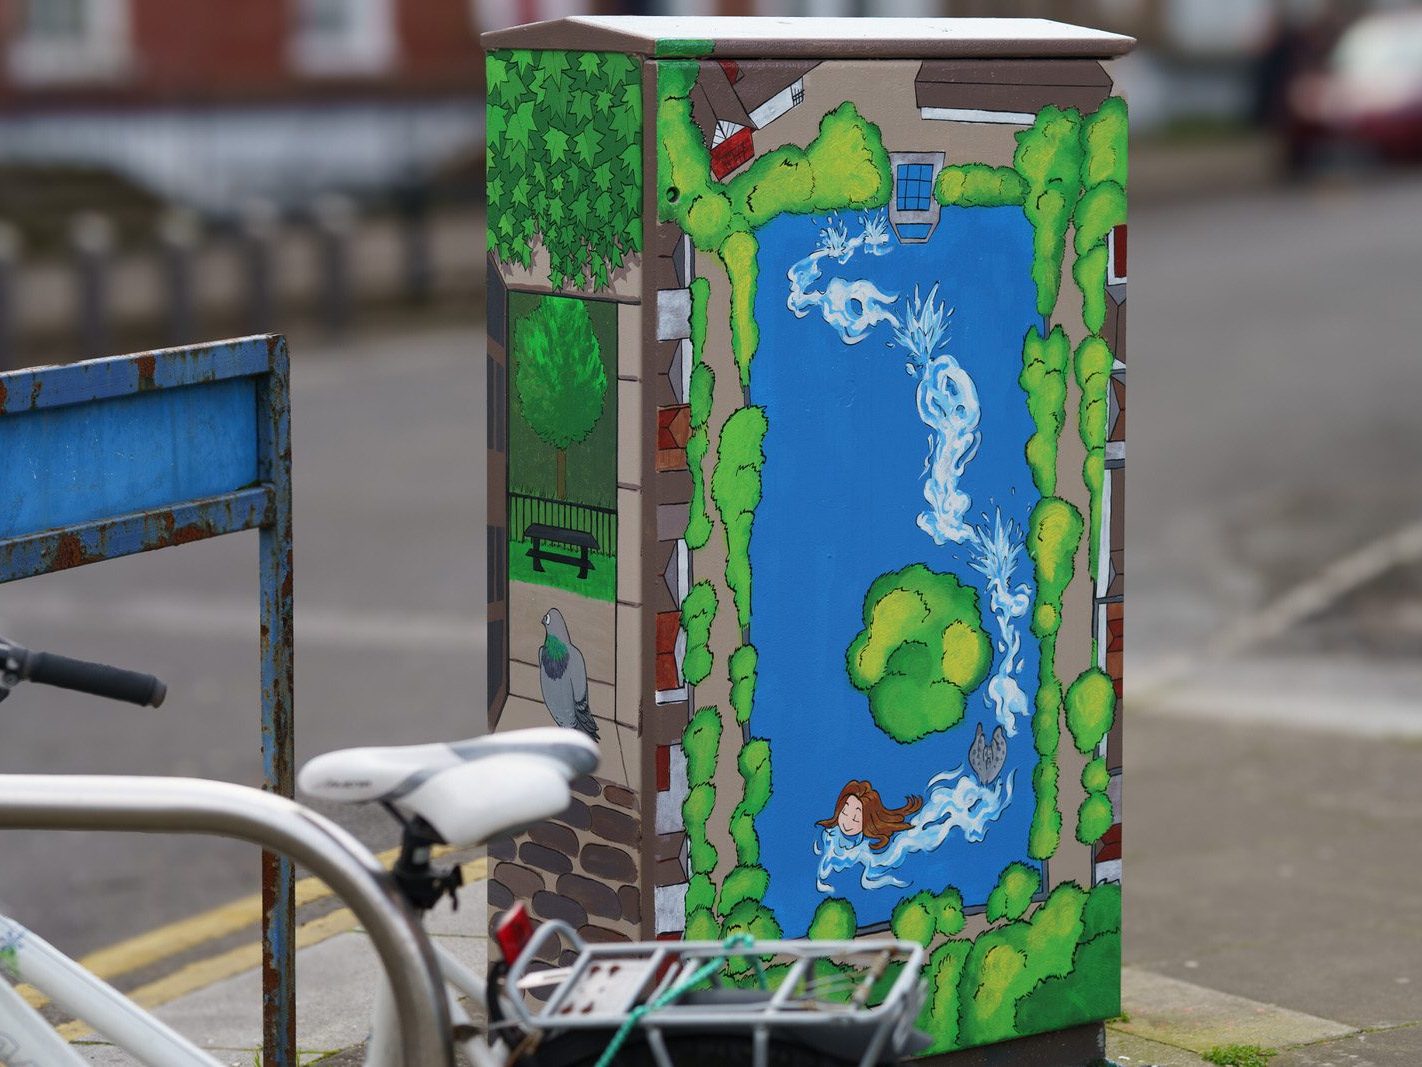 THE BASIN BY LAURA AND CHRISTINA [PAINT-A-BOX STREET ART]-228846-1